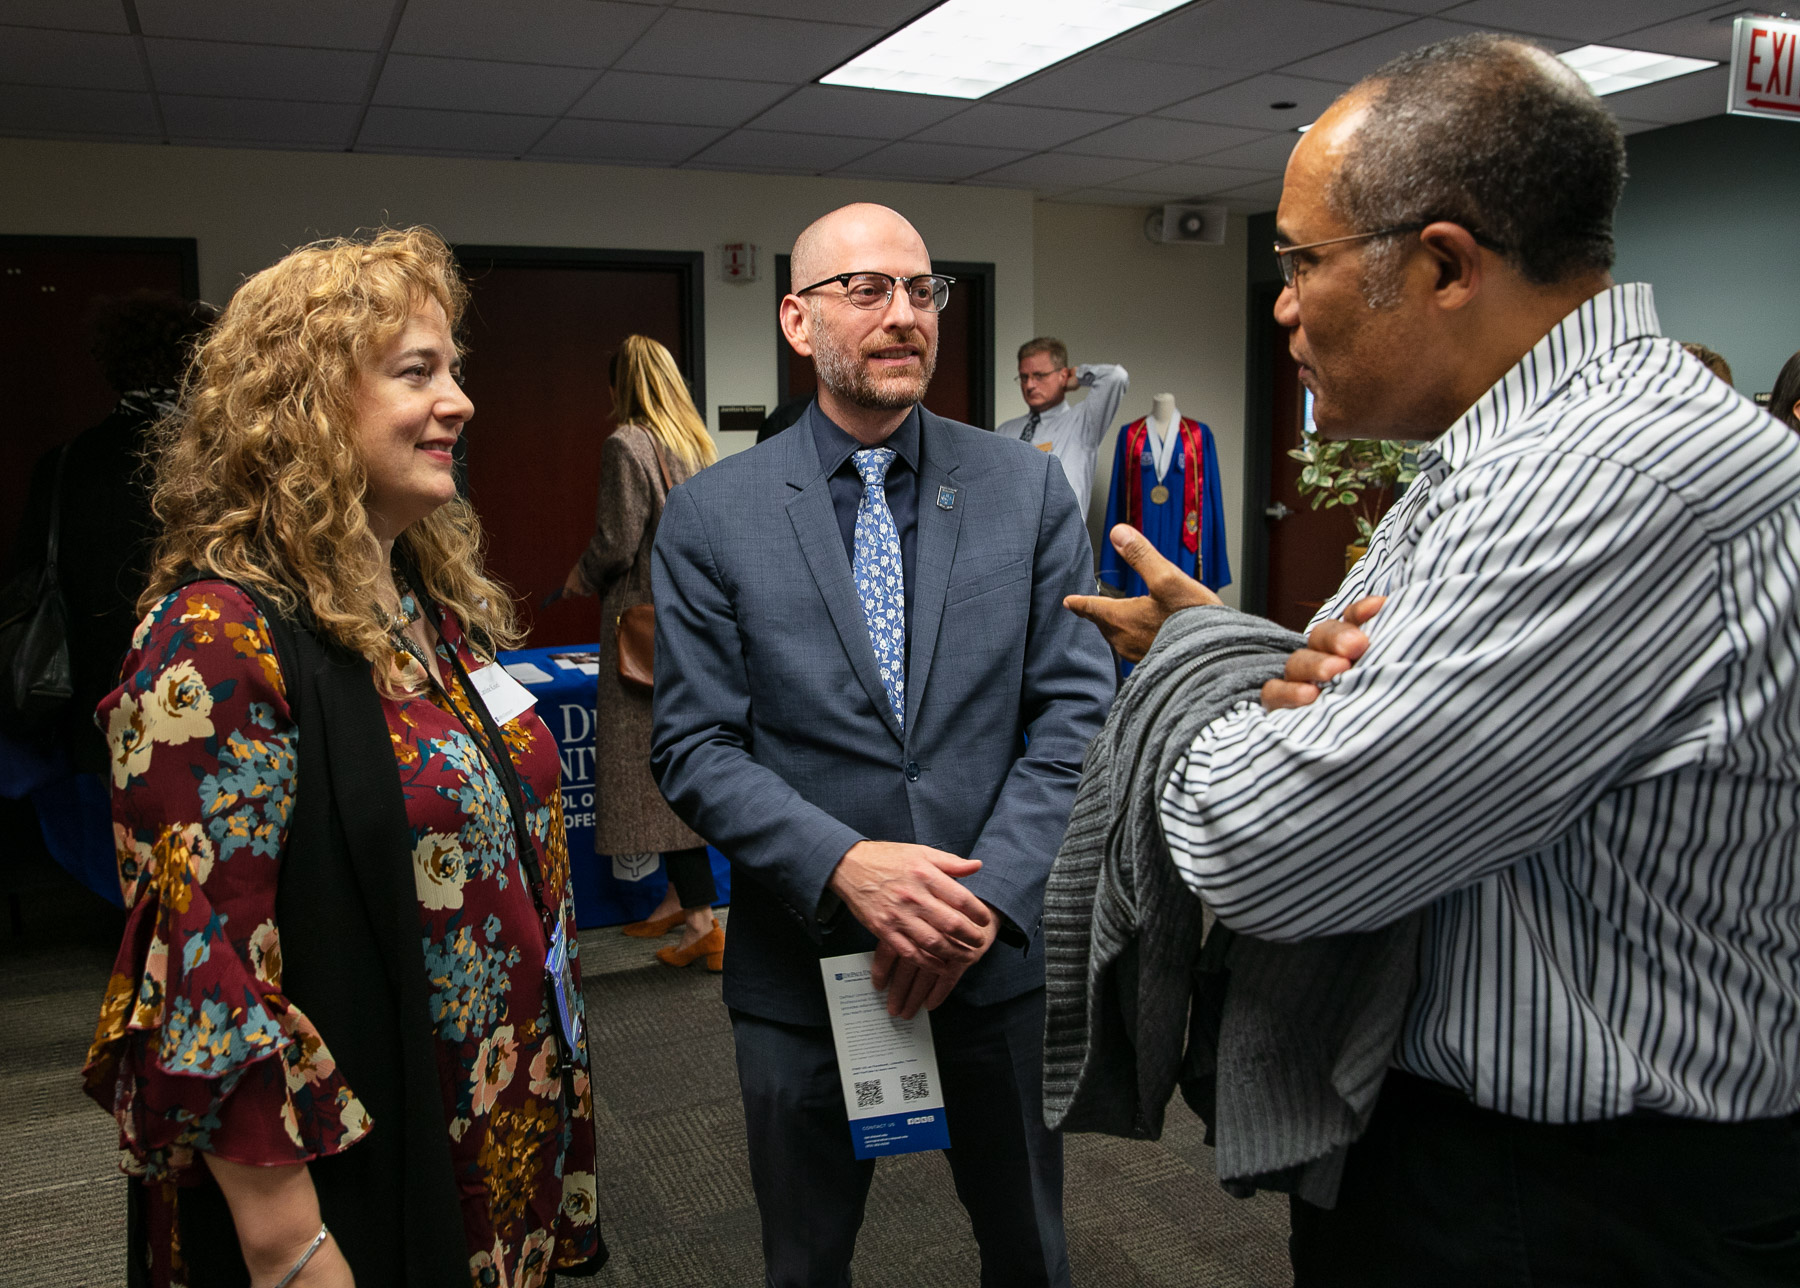 Caroline Kisel, assistant professor, left, and Don Opitz, interim dean for the School of Continuing and Professional Studies, converse with an attendee during the open house event. (DePaul University/Randall Spriggs) 